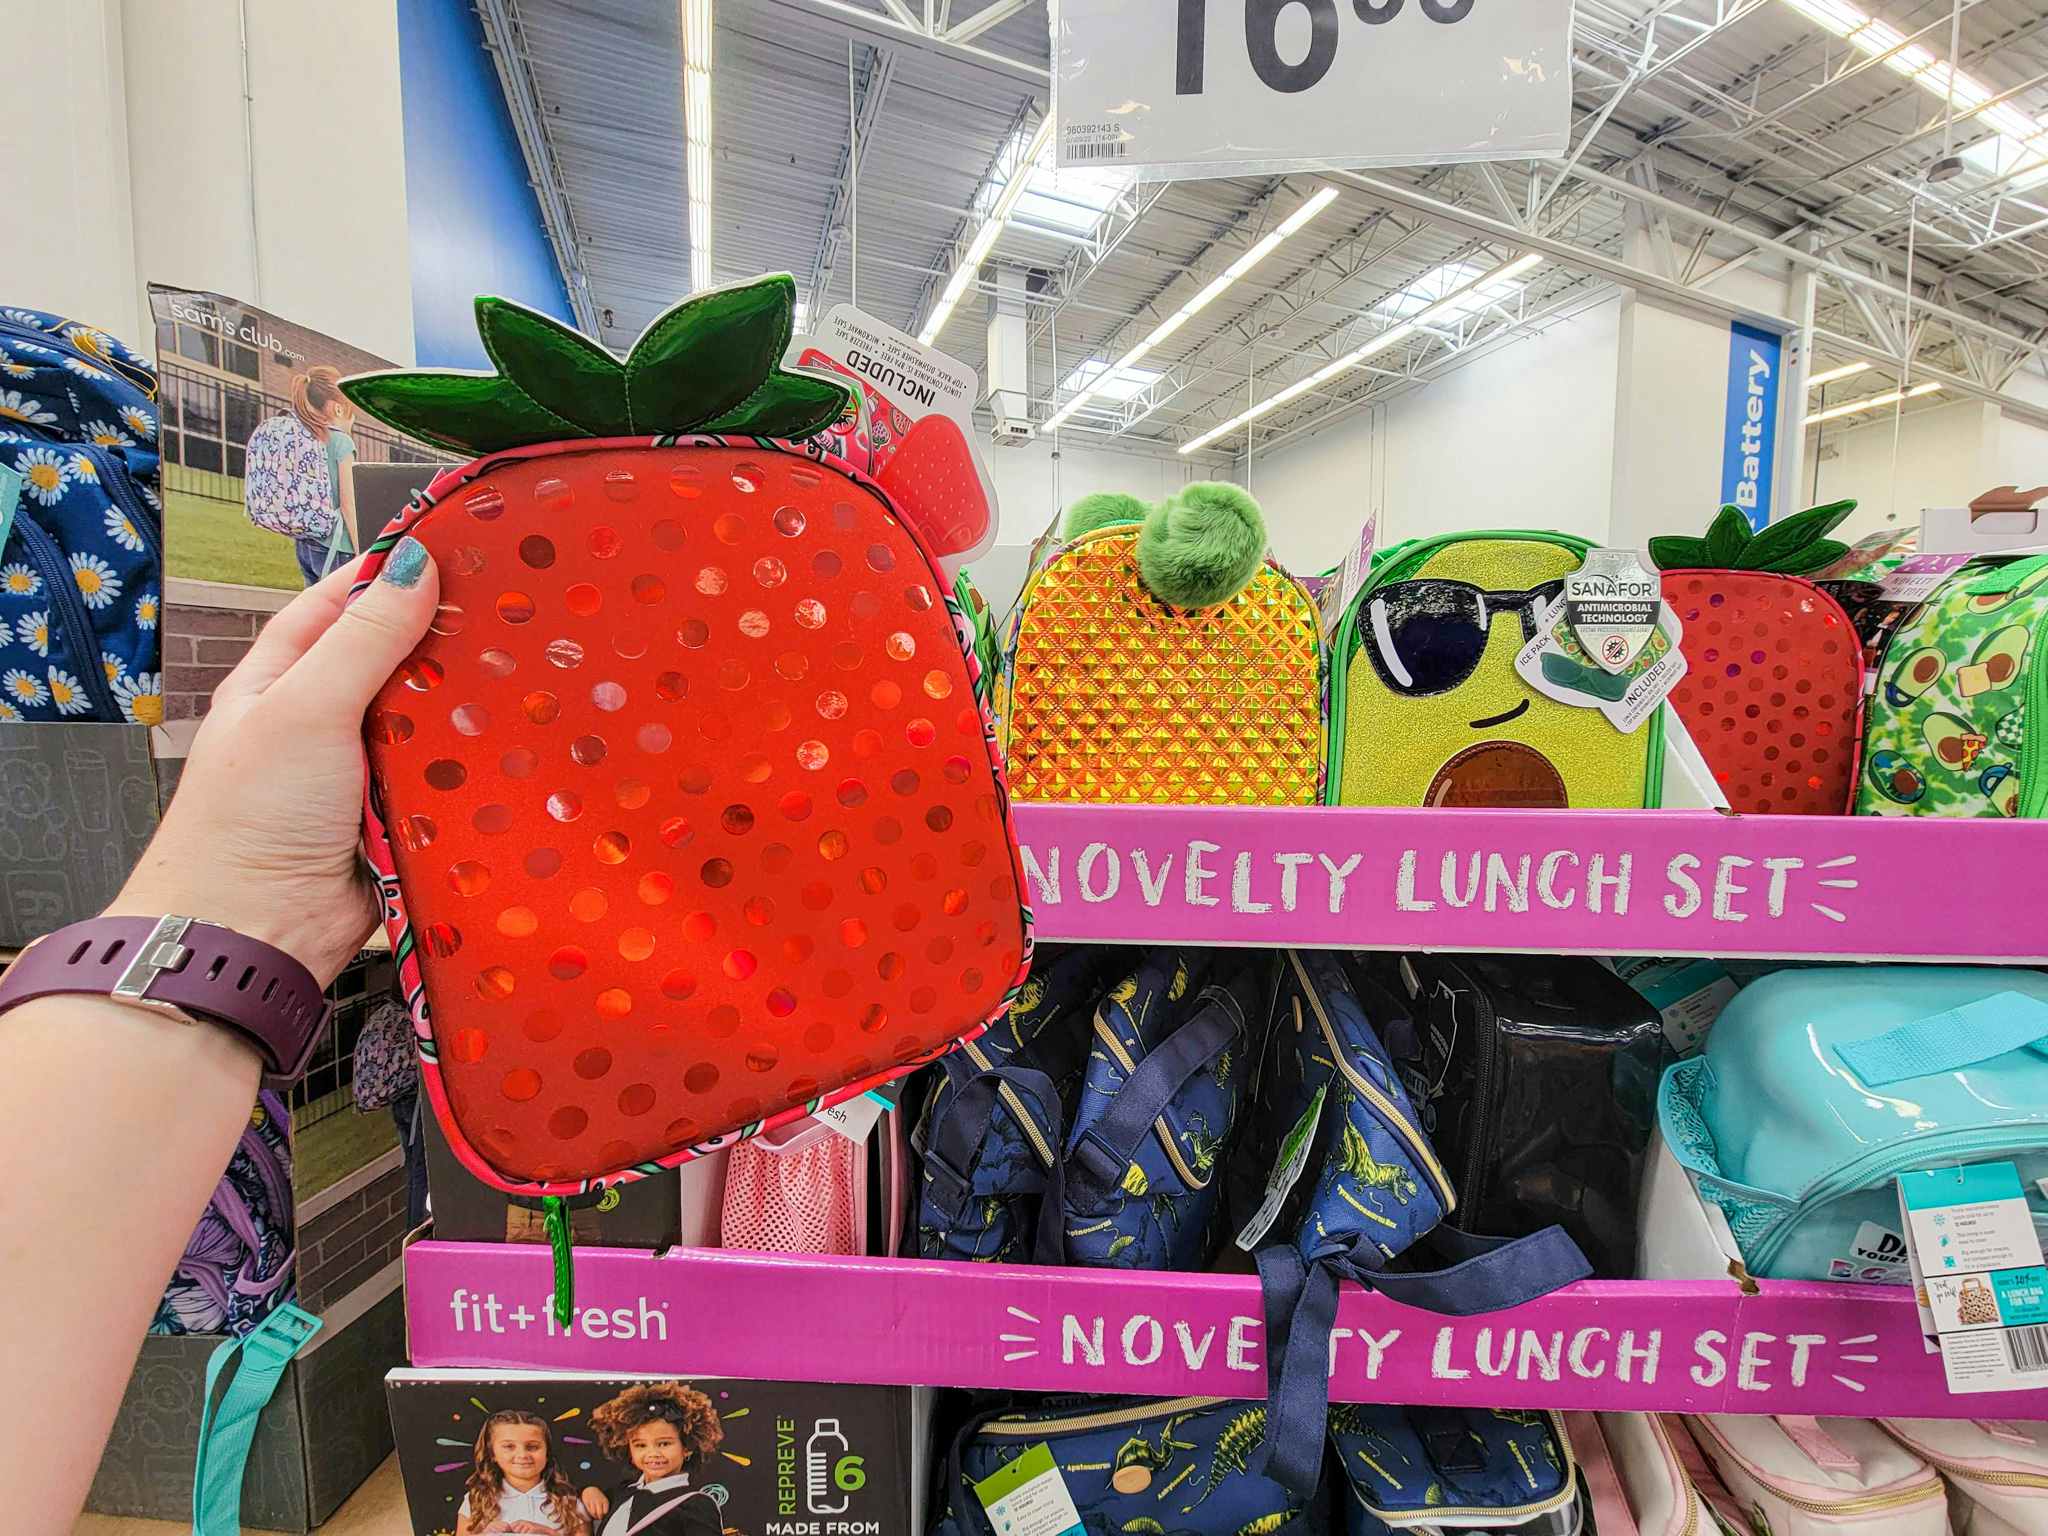 hand holding a strawberry lunch bag by a pineapple and avocado lunch bag